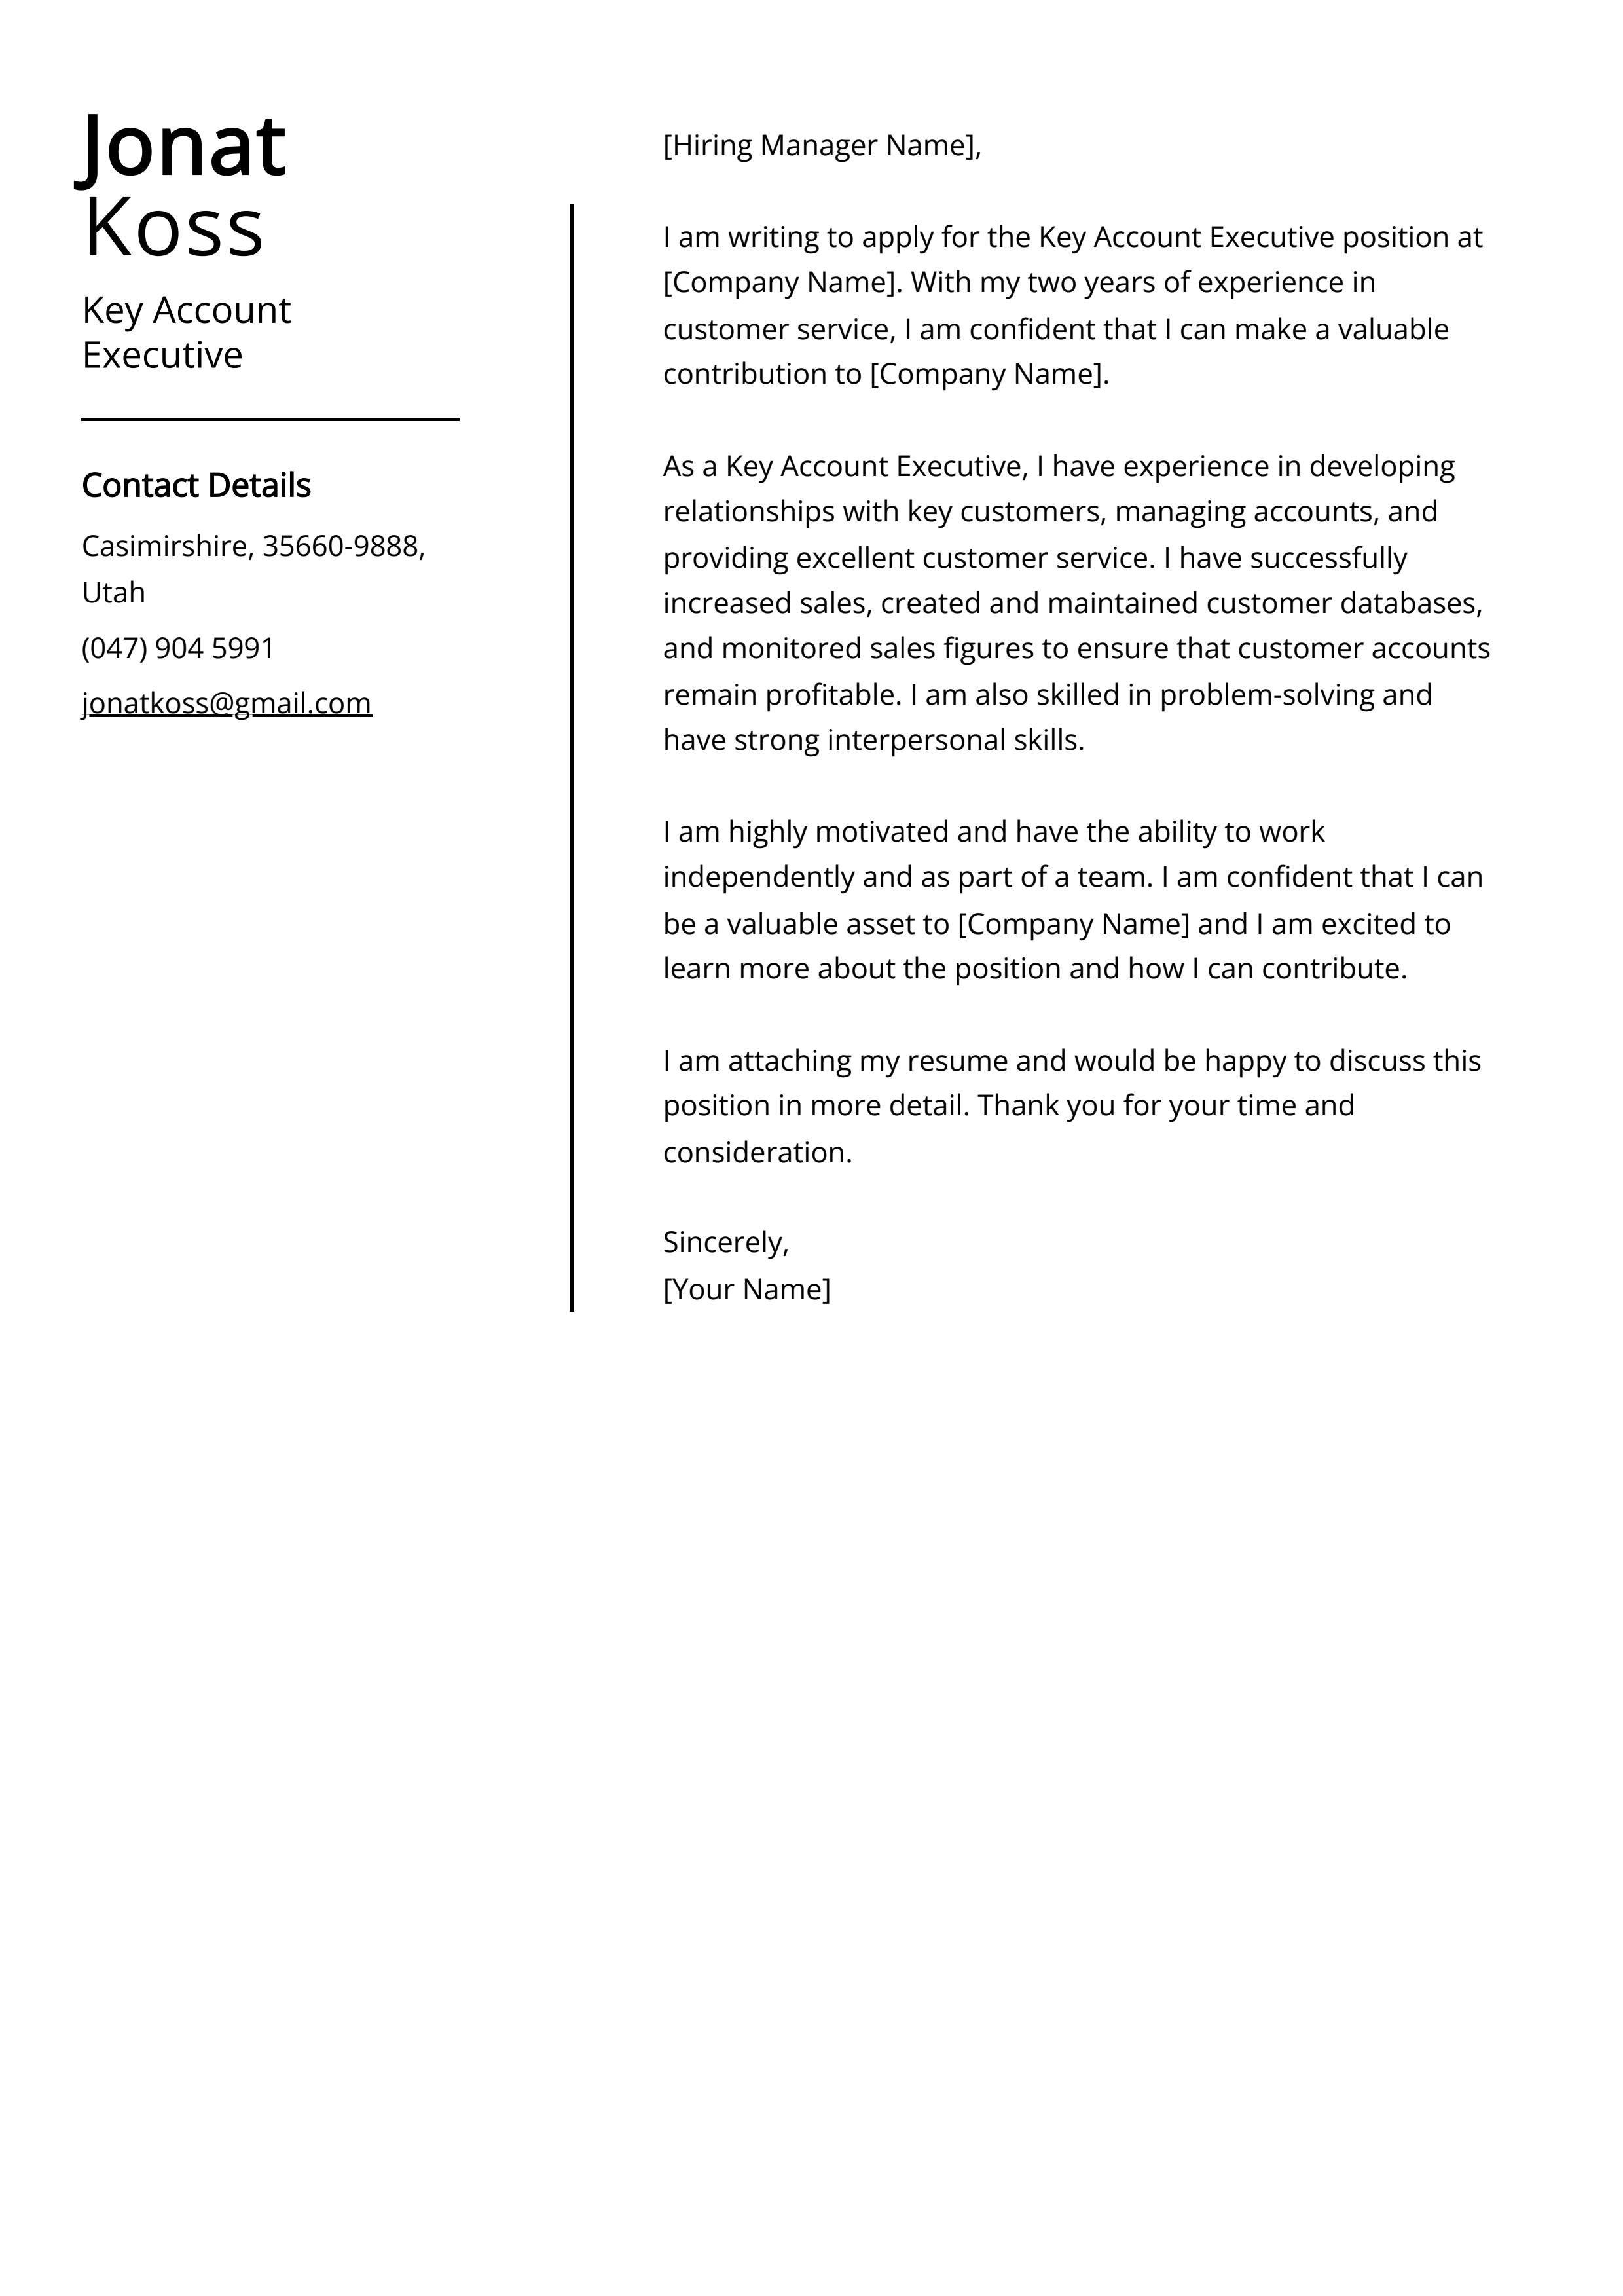 Key Account Executive Cover Letter Example